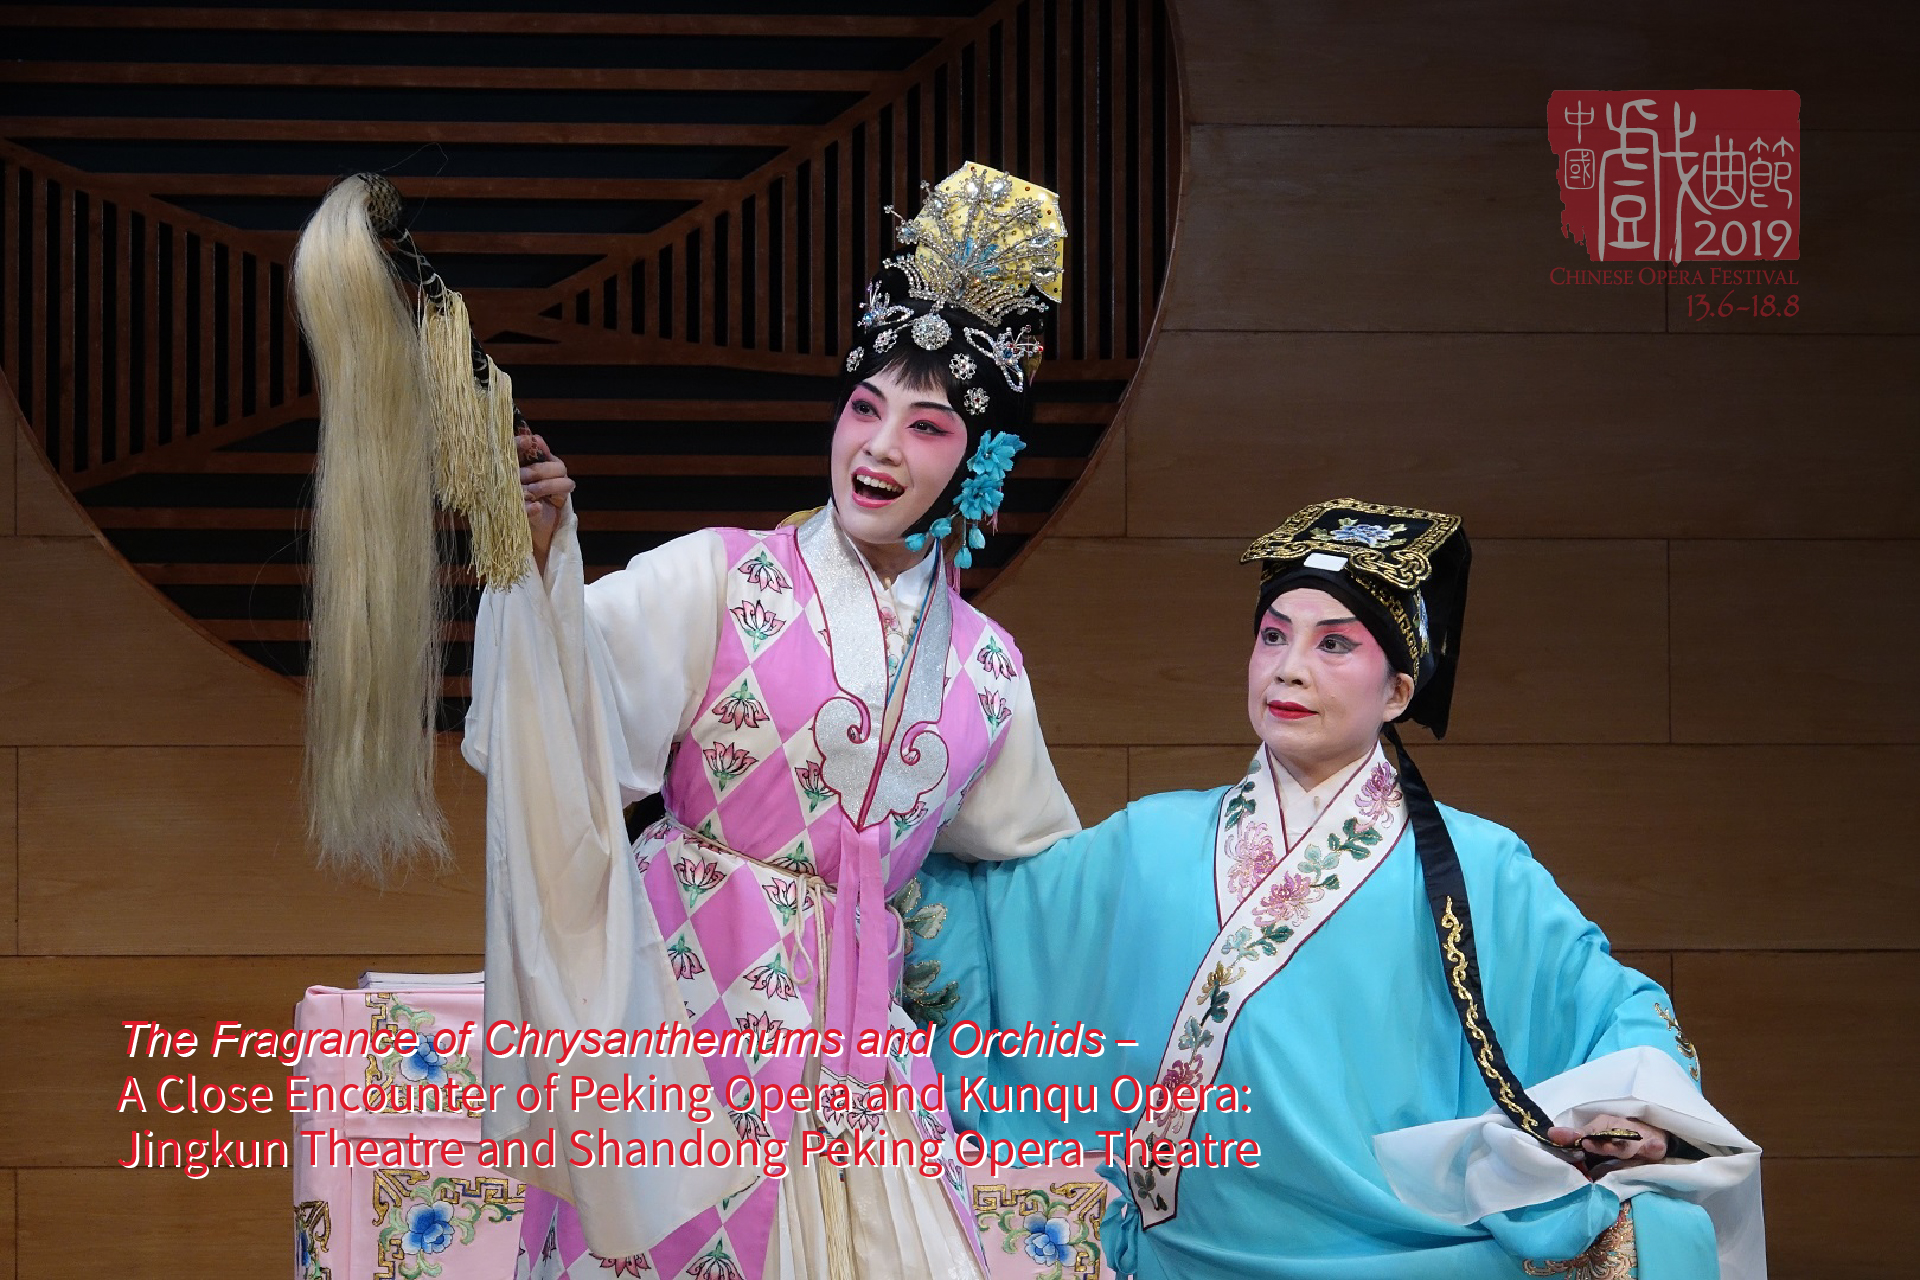 <em>Kunqu: Stealing the Poem from The Story of the Jade Hairpin</em> Cheung Ching-man (left), Choy Yuk-chun (right)